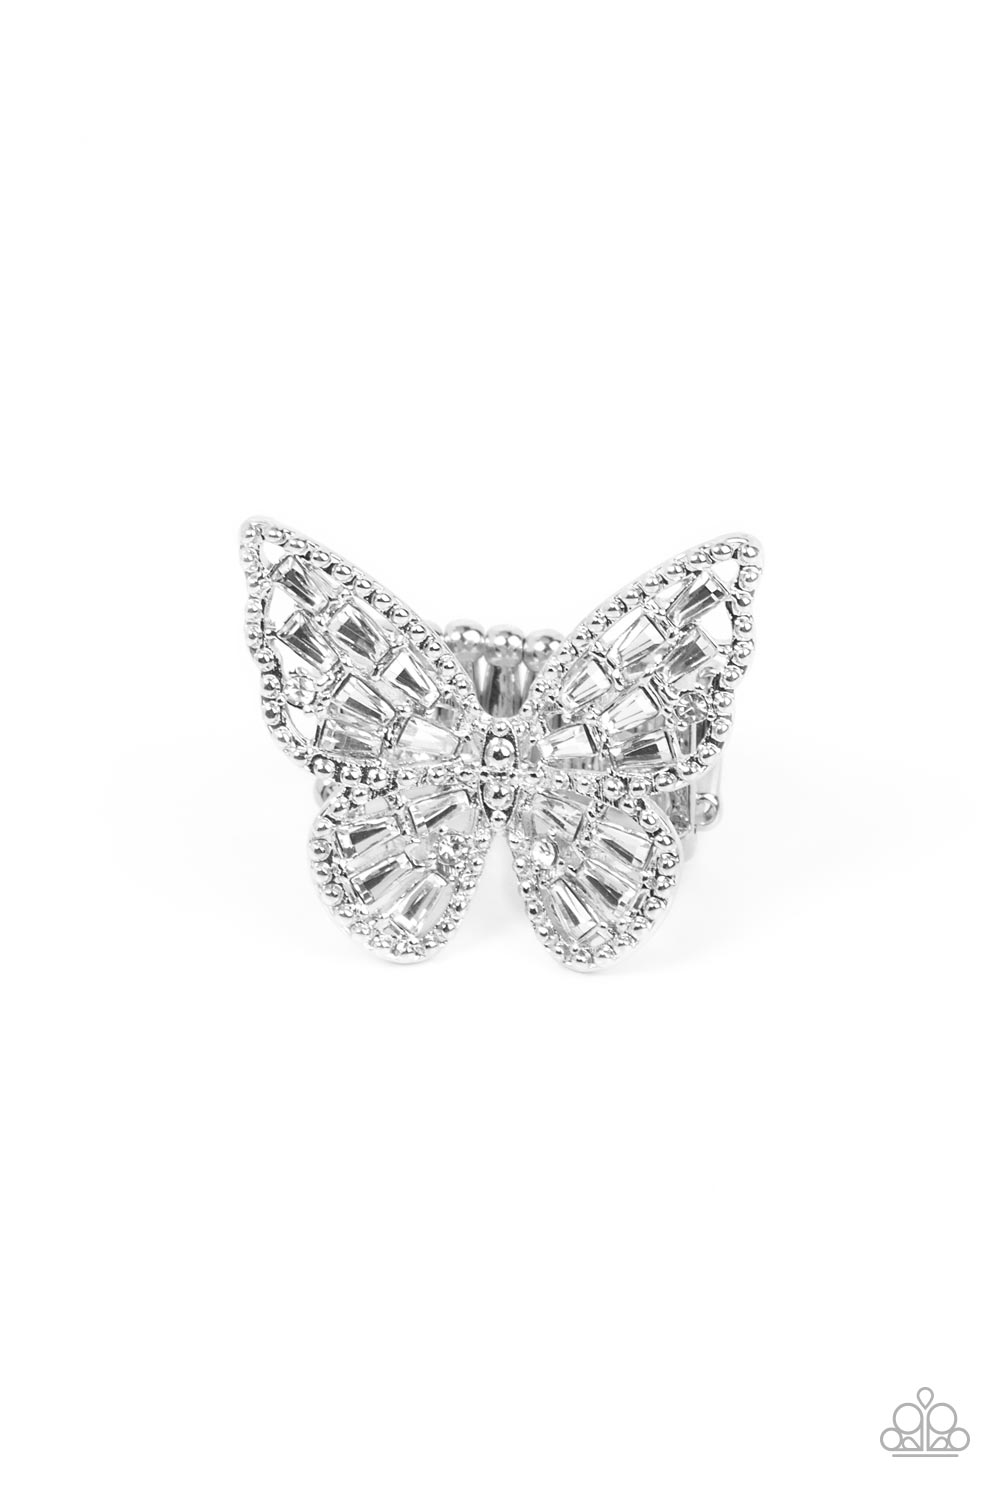 Seven Piece White Crystal Butterfly Ring Set - HoMafy